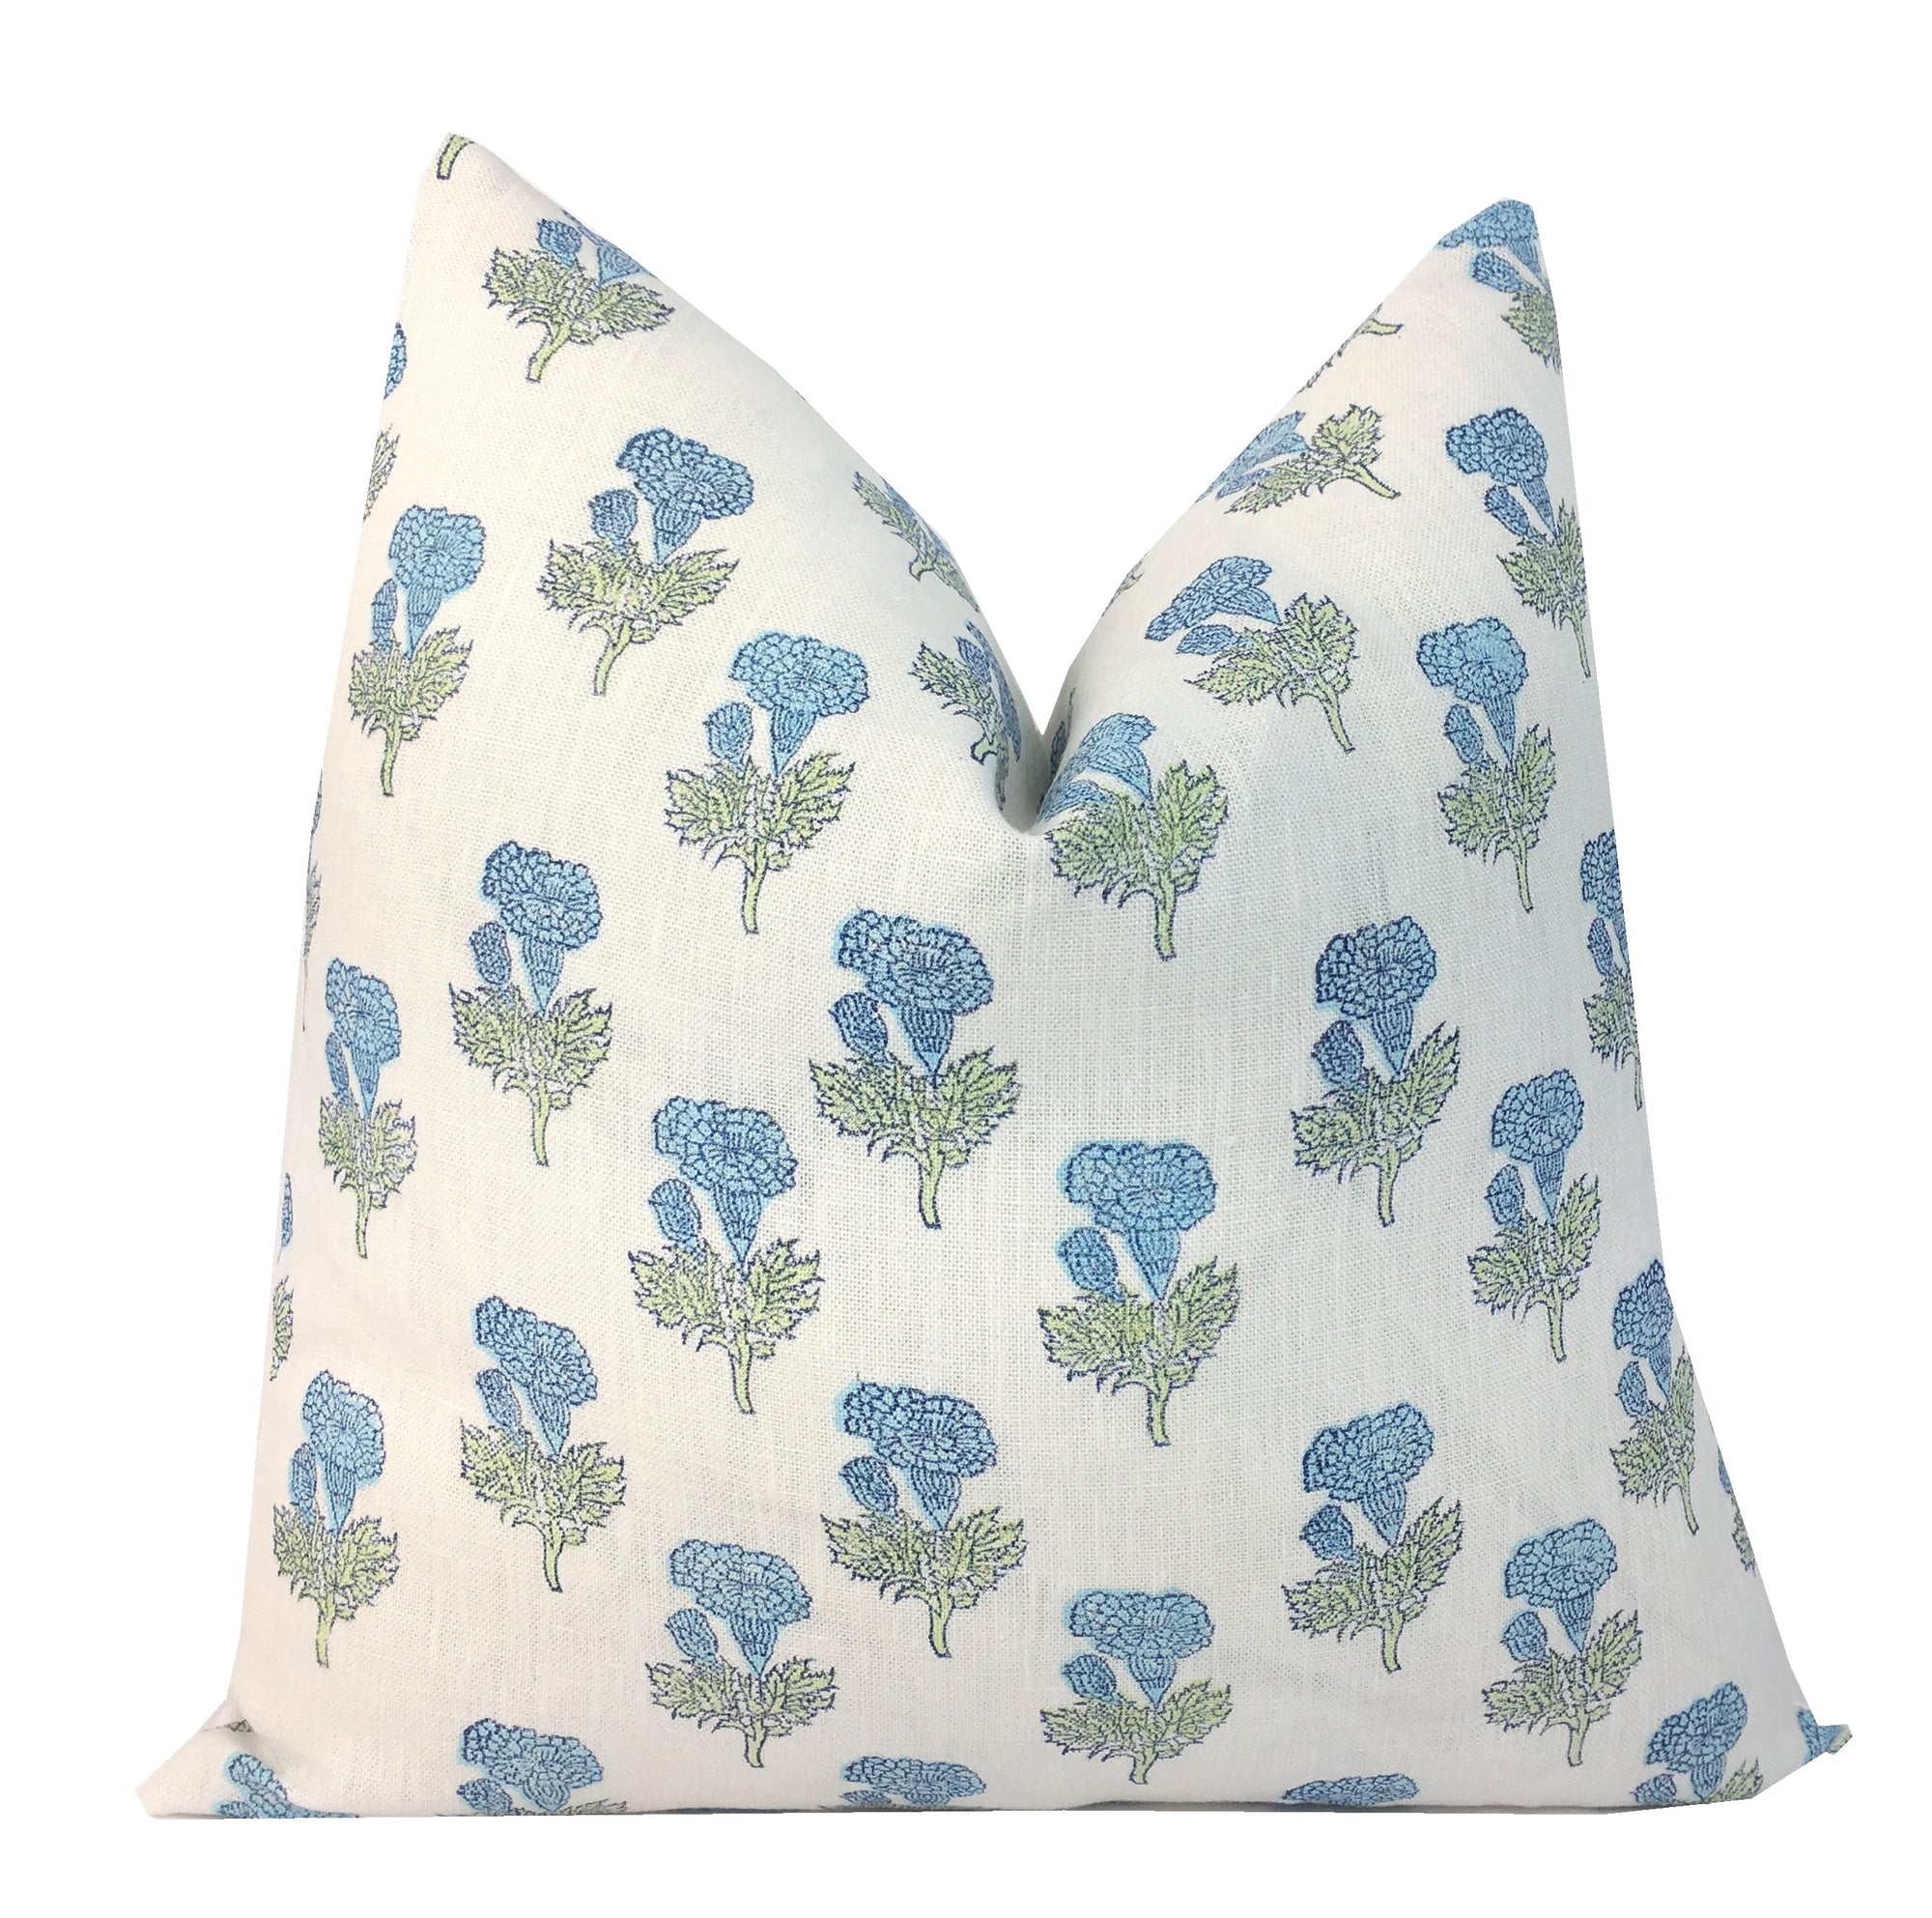 Samali Sky Blue and Green Floral Block Print Pillow Cover | Mughal Flower